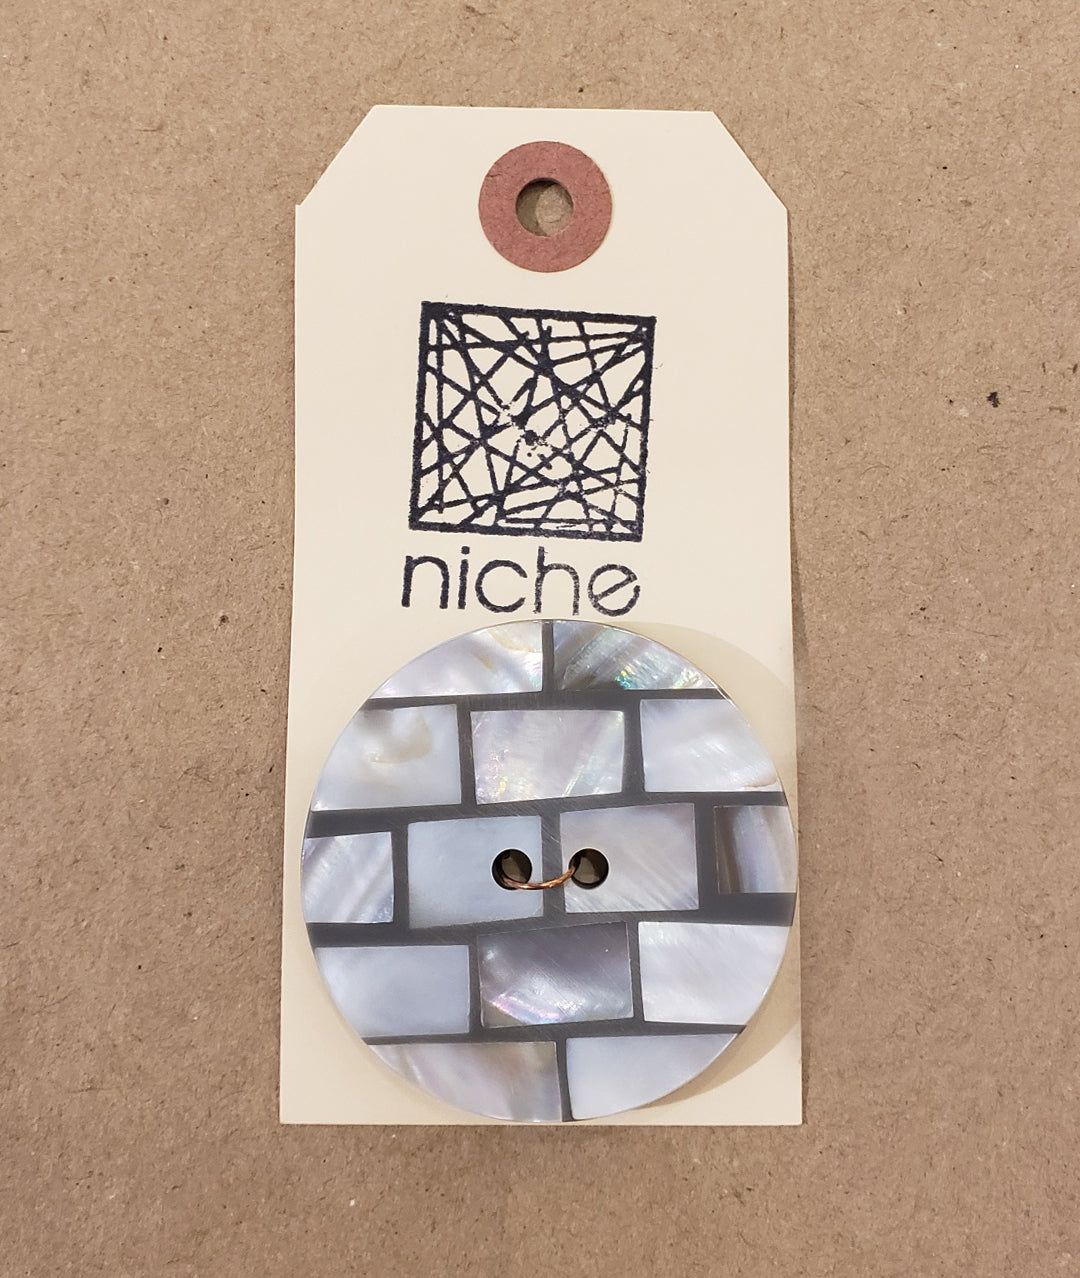 tiled button on a Niche card